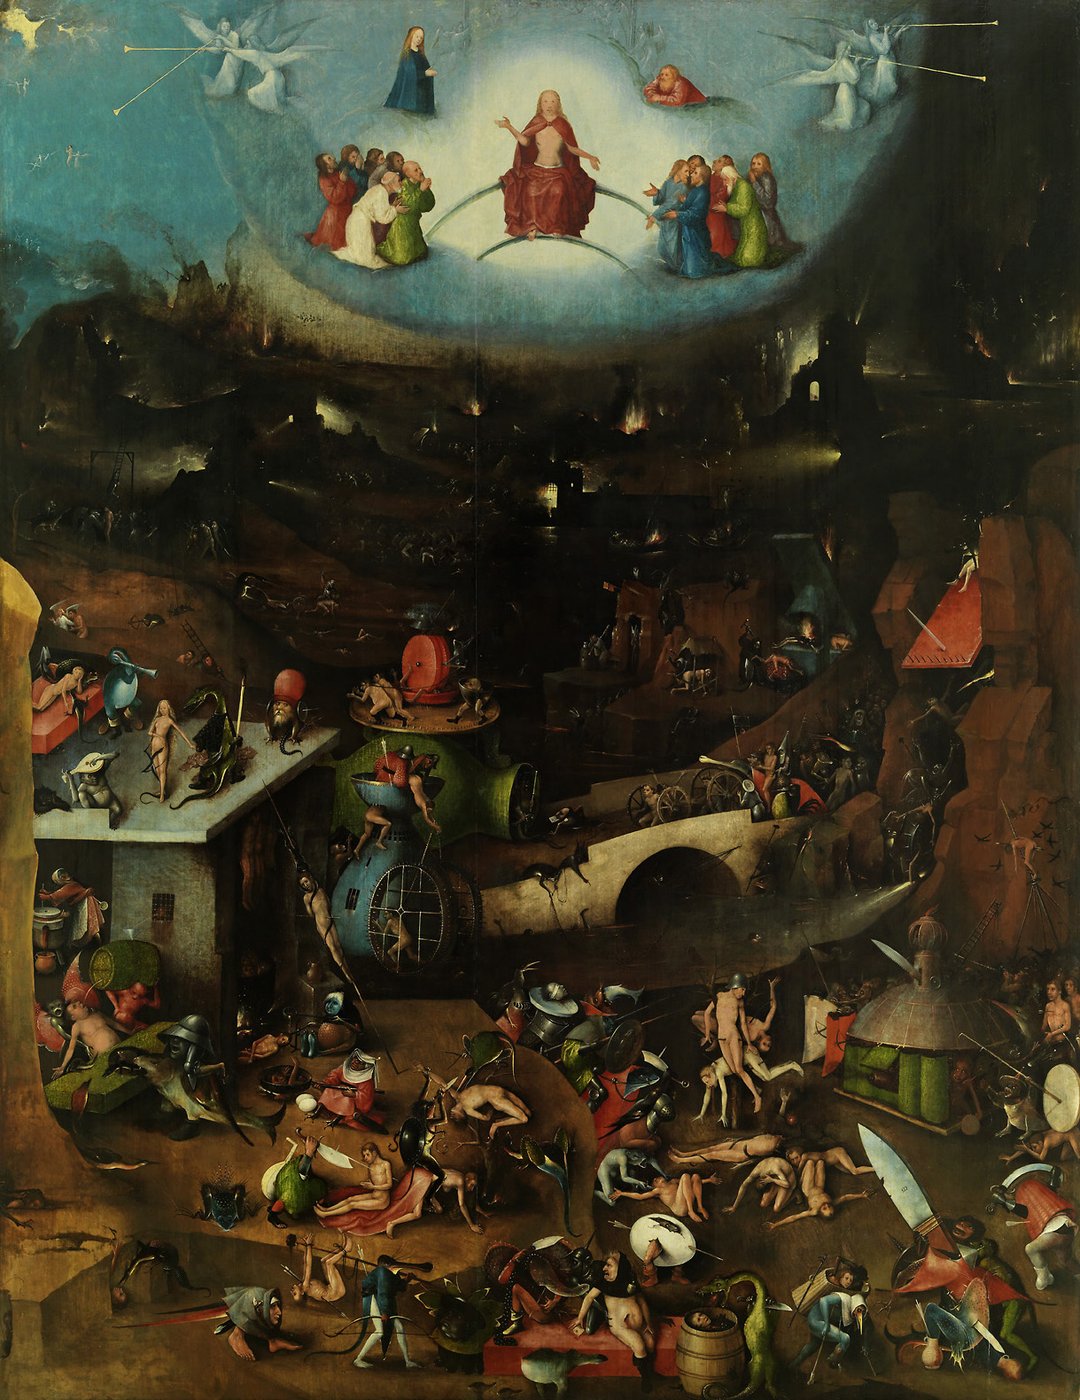 A historical painting, at the upper edge of the picture blue sky and several persons worshipping a man in the center, he is surrounded by angels with trumpets, below a dark scene of a burning village with human-animal-mixed creatures, which are partly spiked, mangled and quartered.